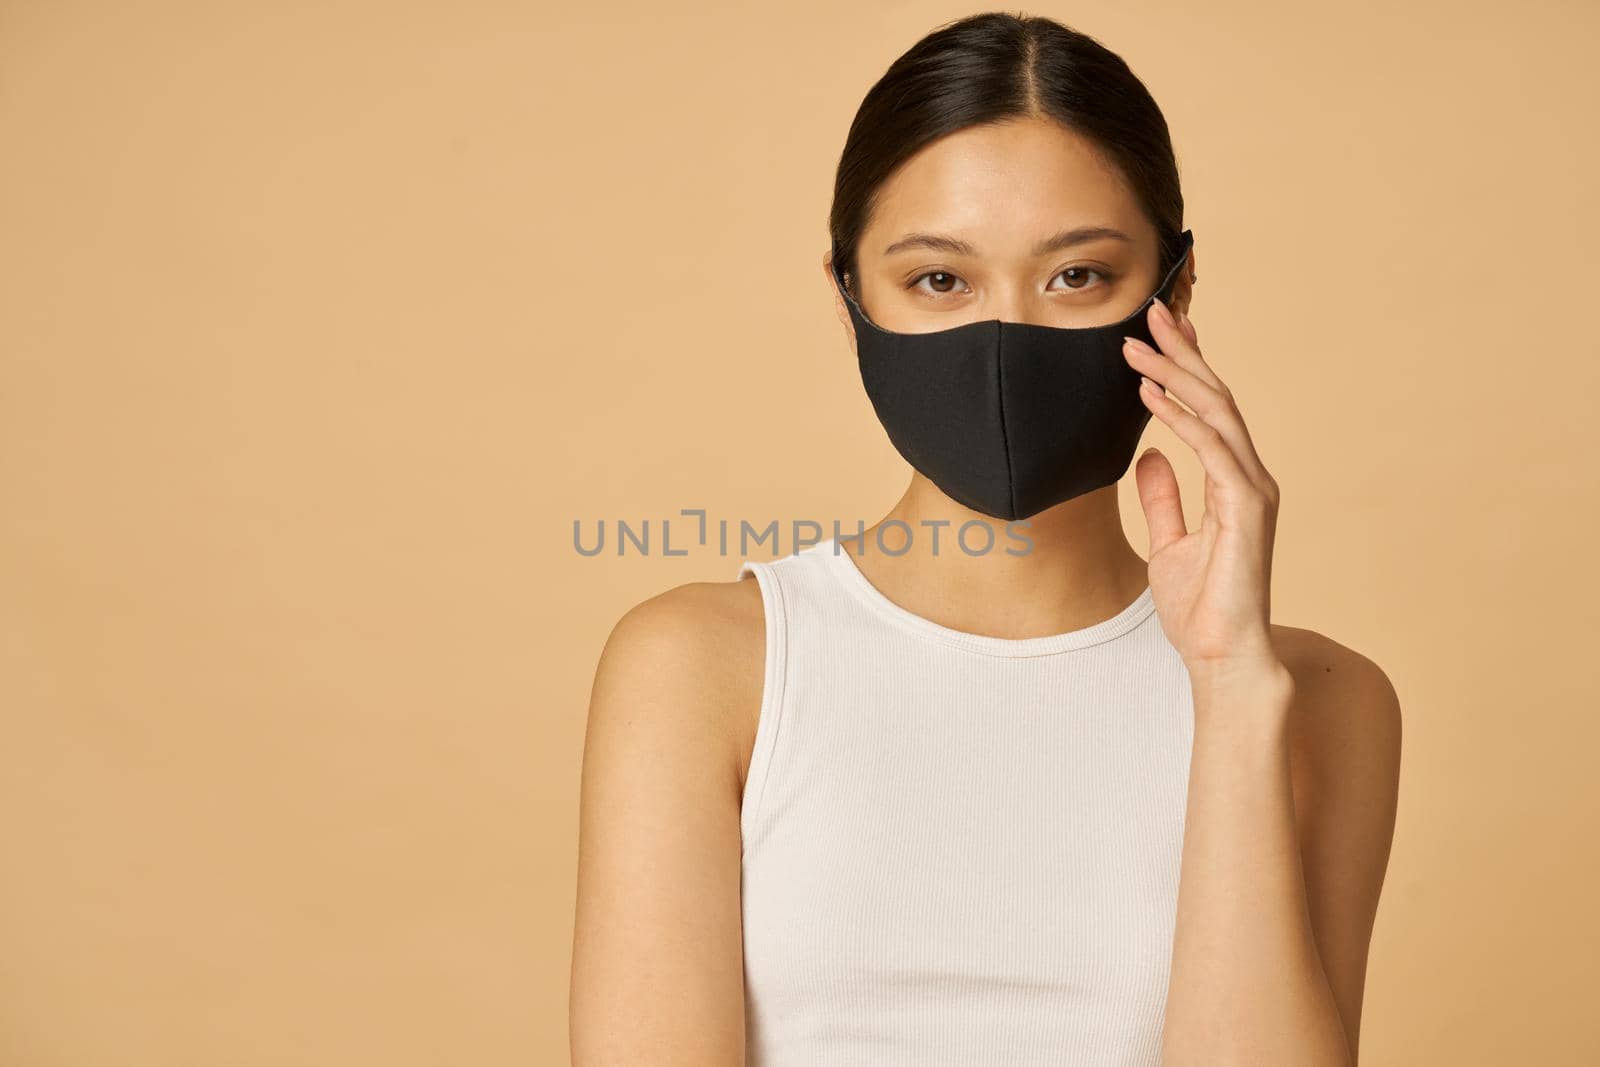 Charming young woman wearing black facial mask looking at camera, posing isolated over beige background by friendsstock